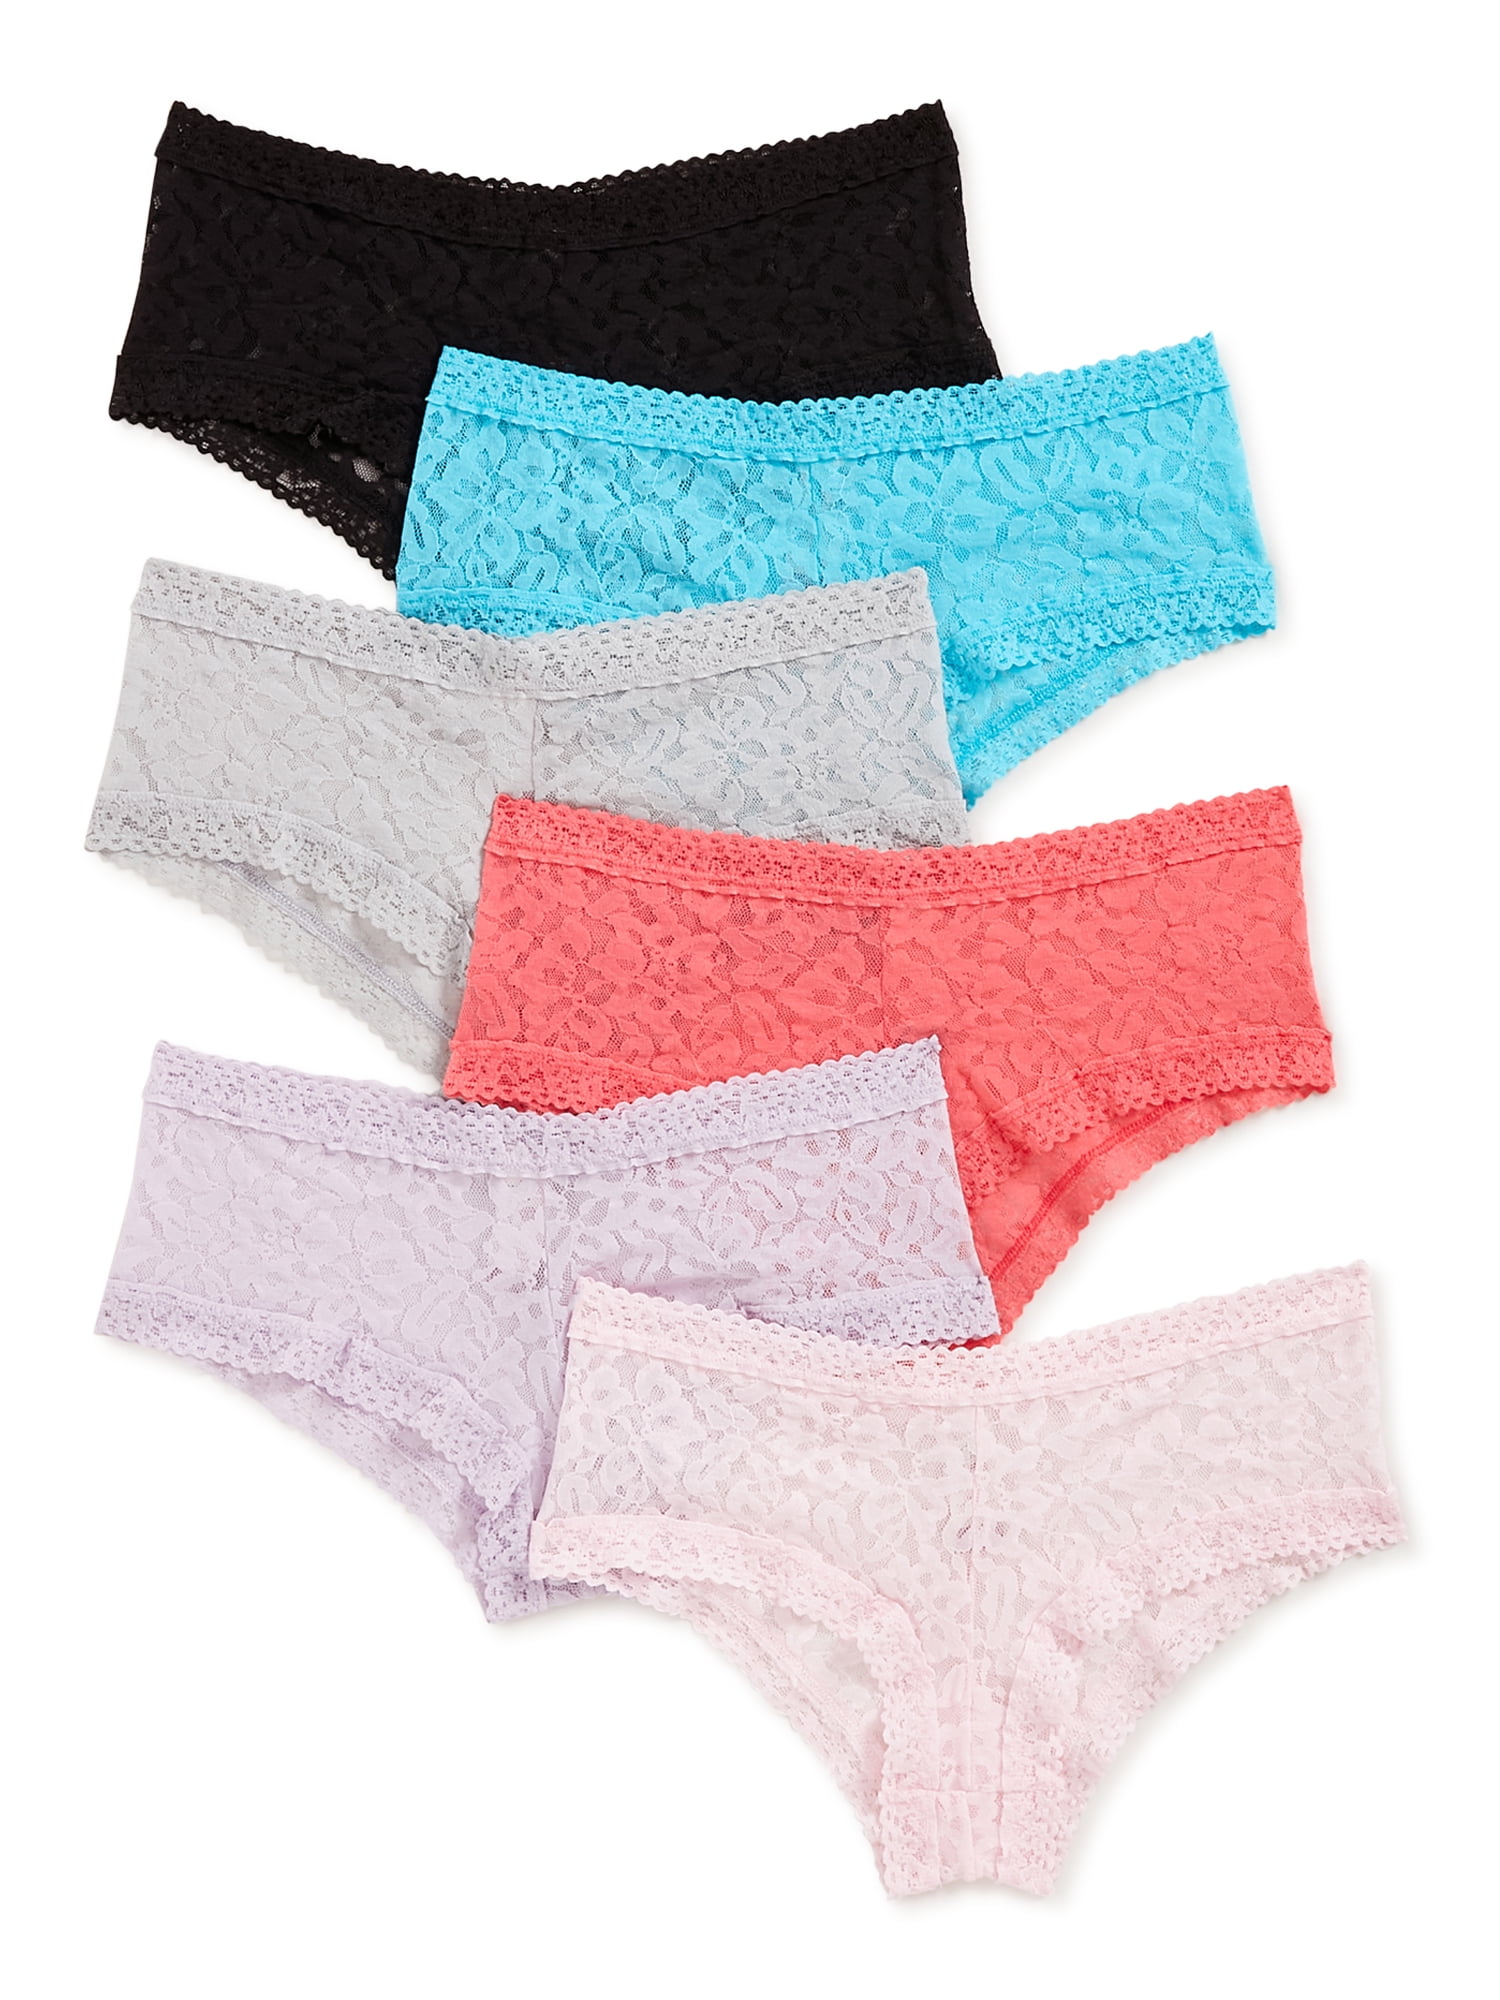 Secret Treasures Womens' Lace Stretch Cheeky Panties, 6-Pack